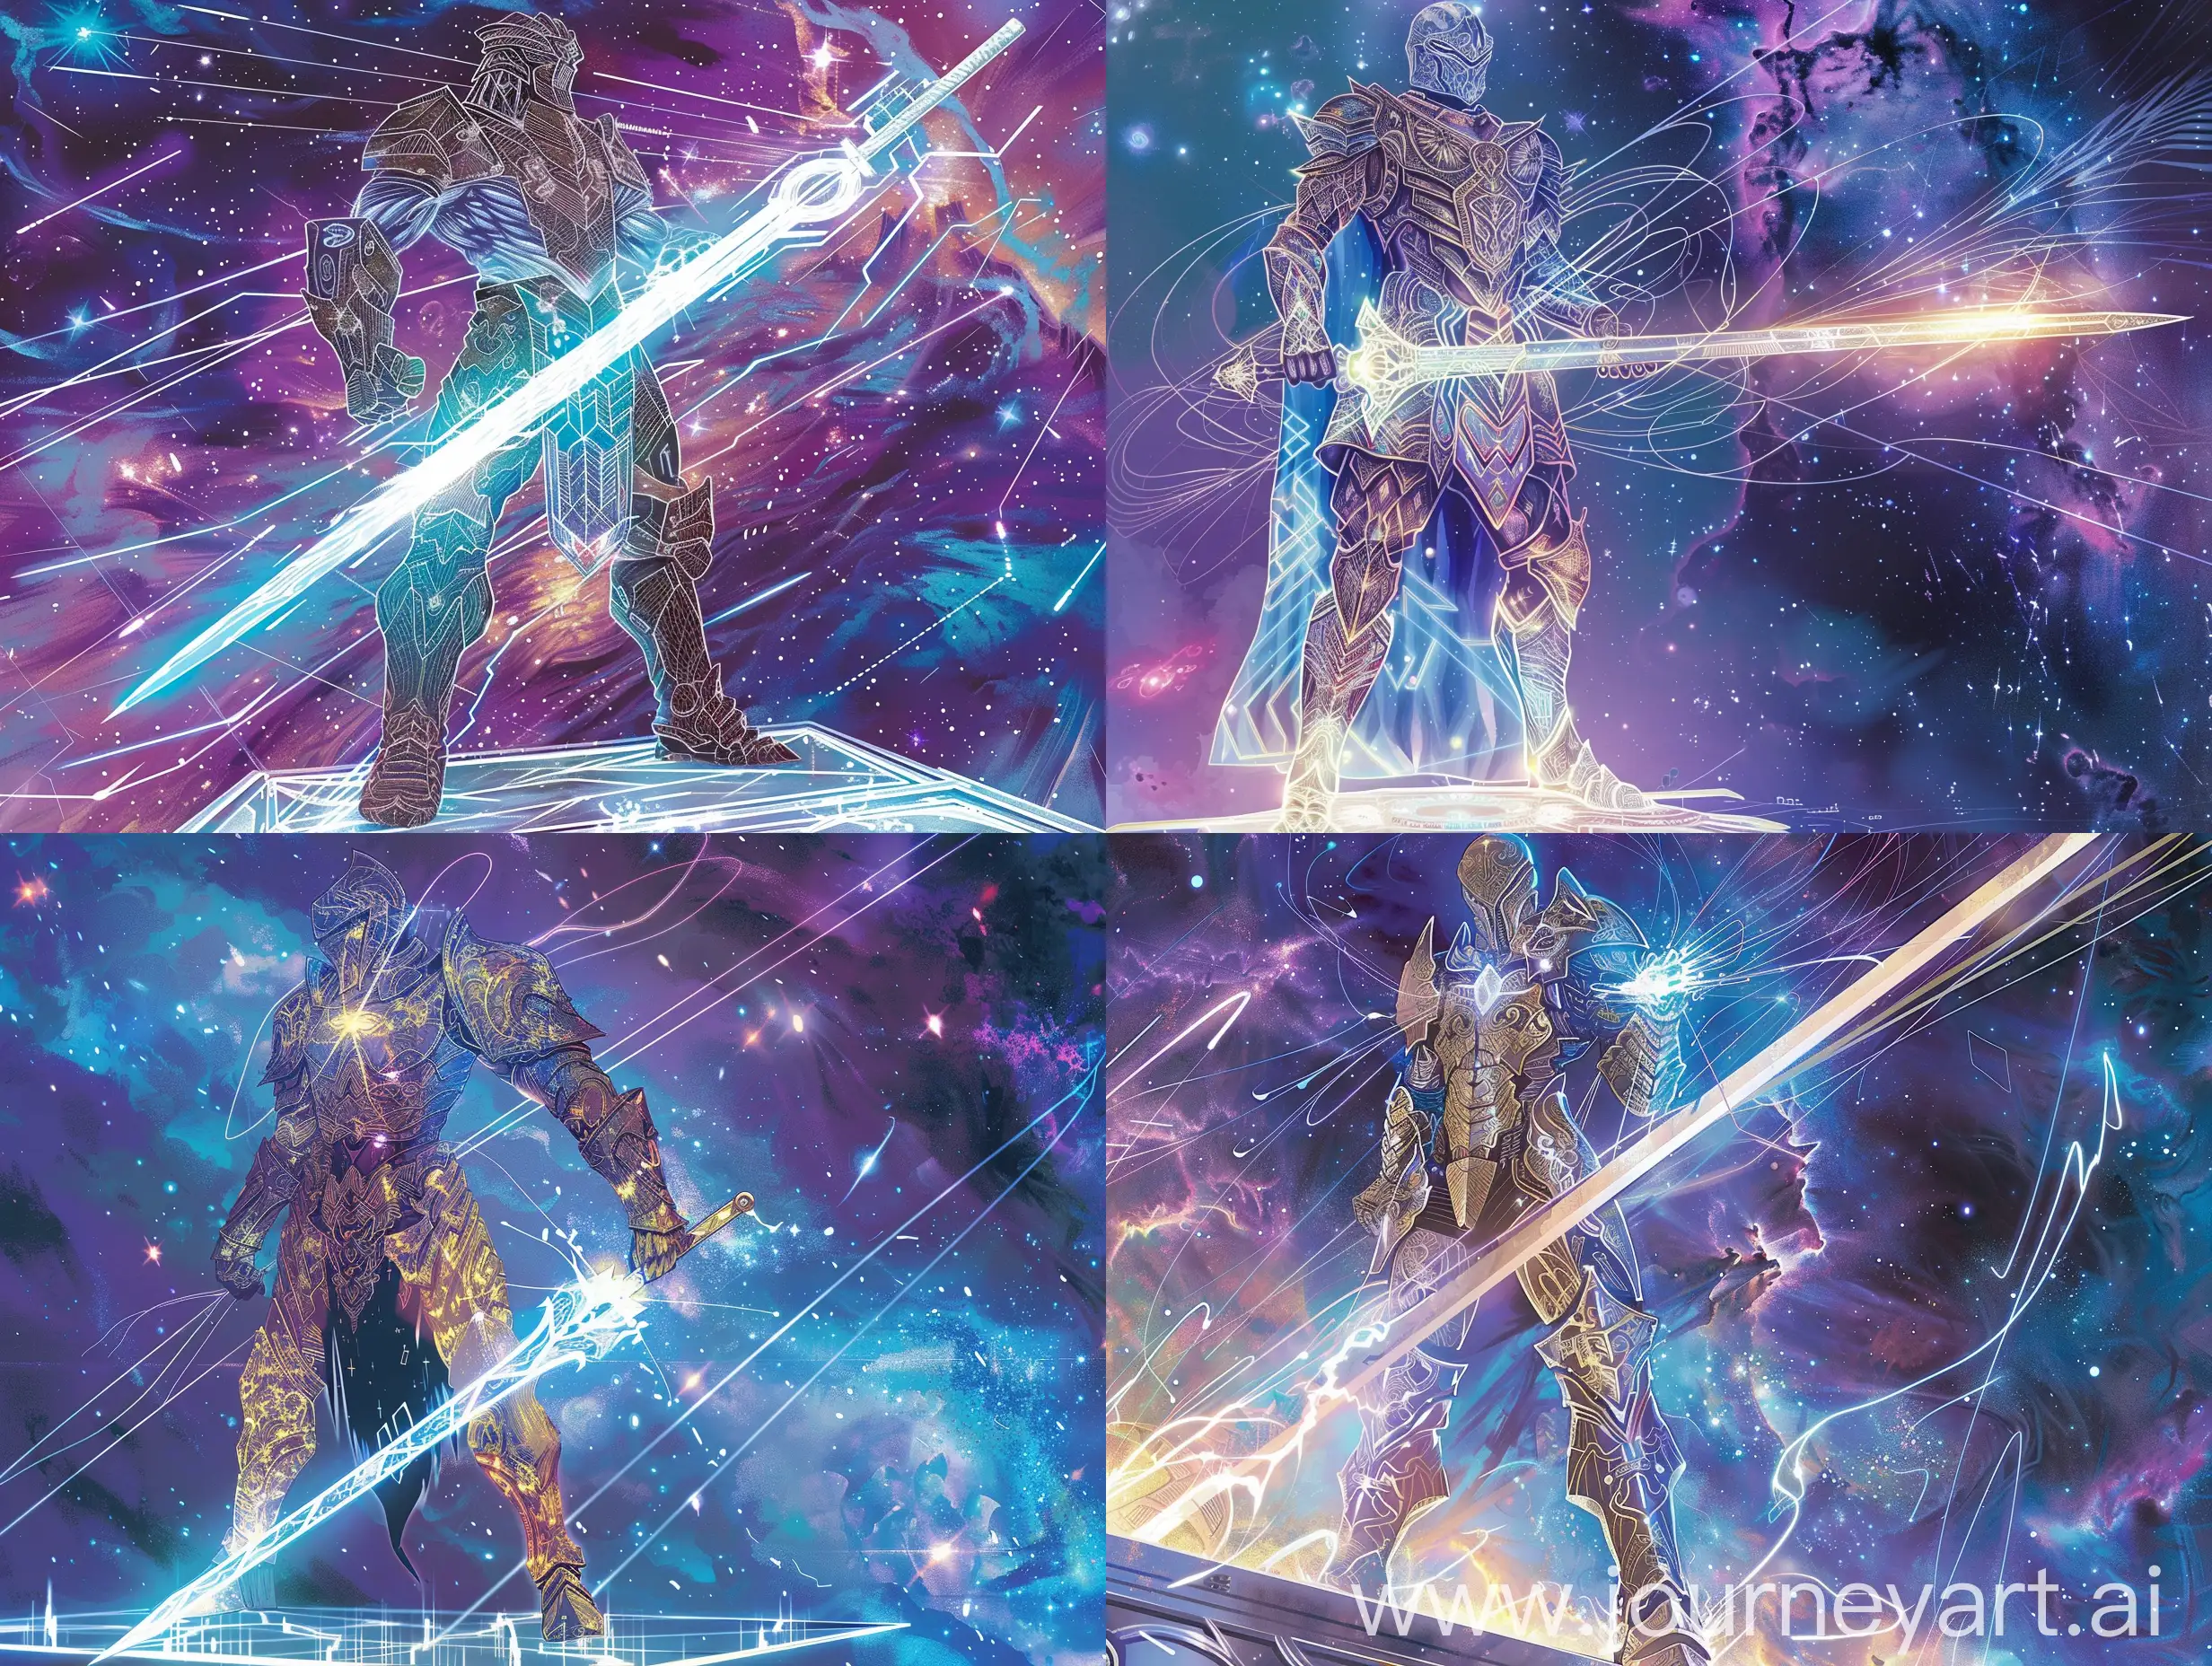 Cosmic-Knight-Glowing-Armor-and-Sword-in-Space